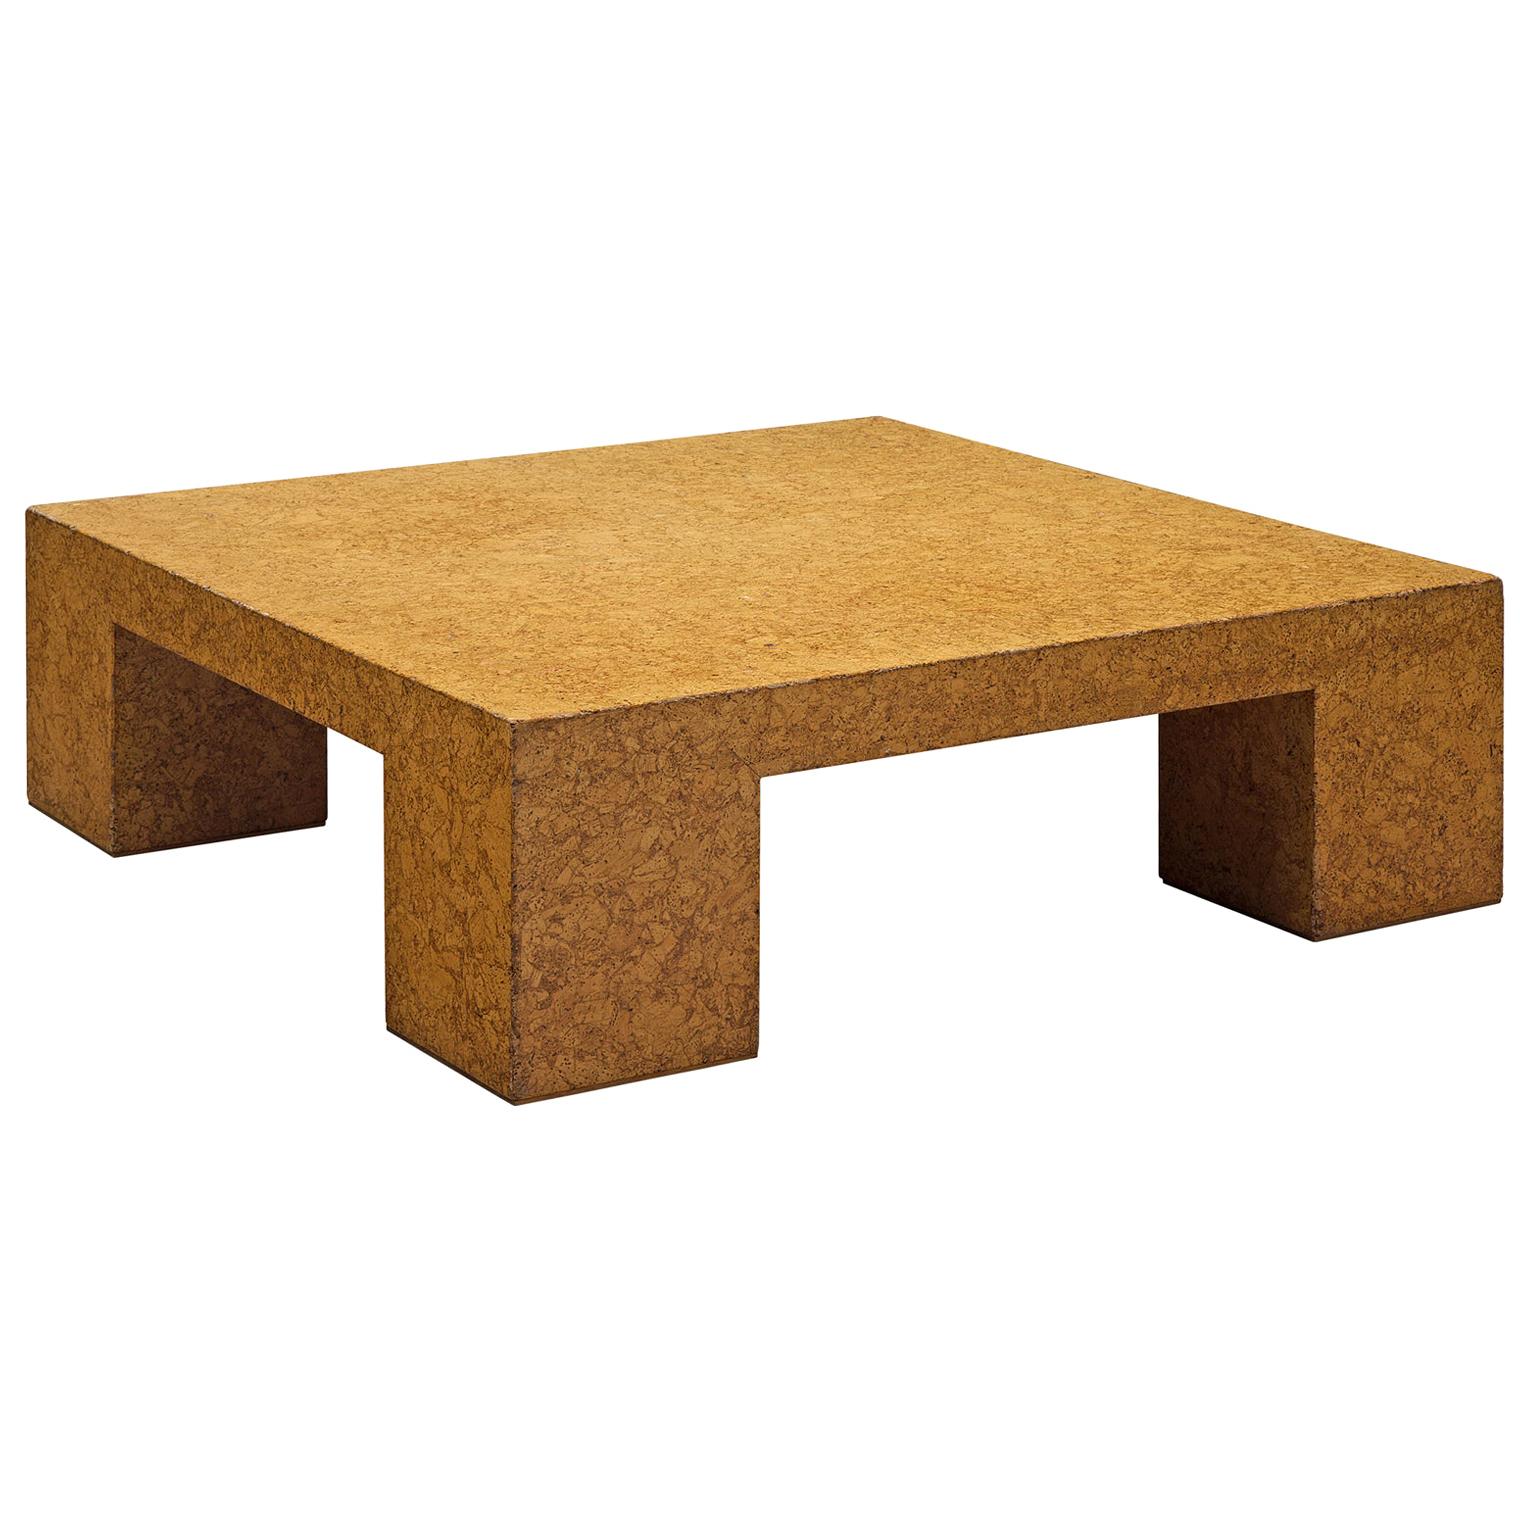 Jan De Smedt Architectural Coffee Table in Cork